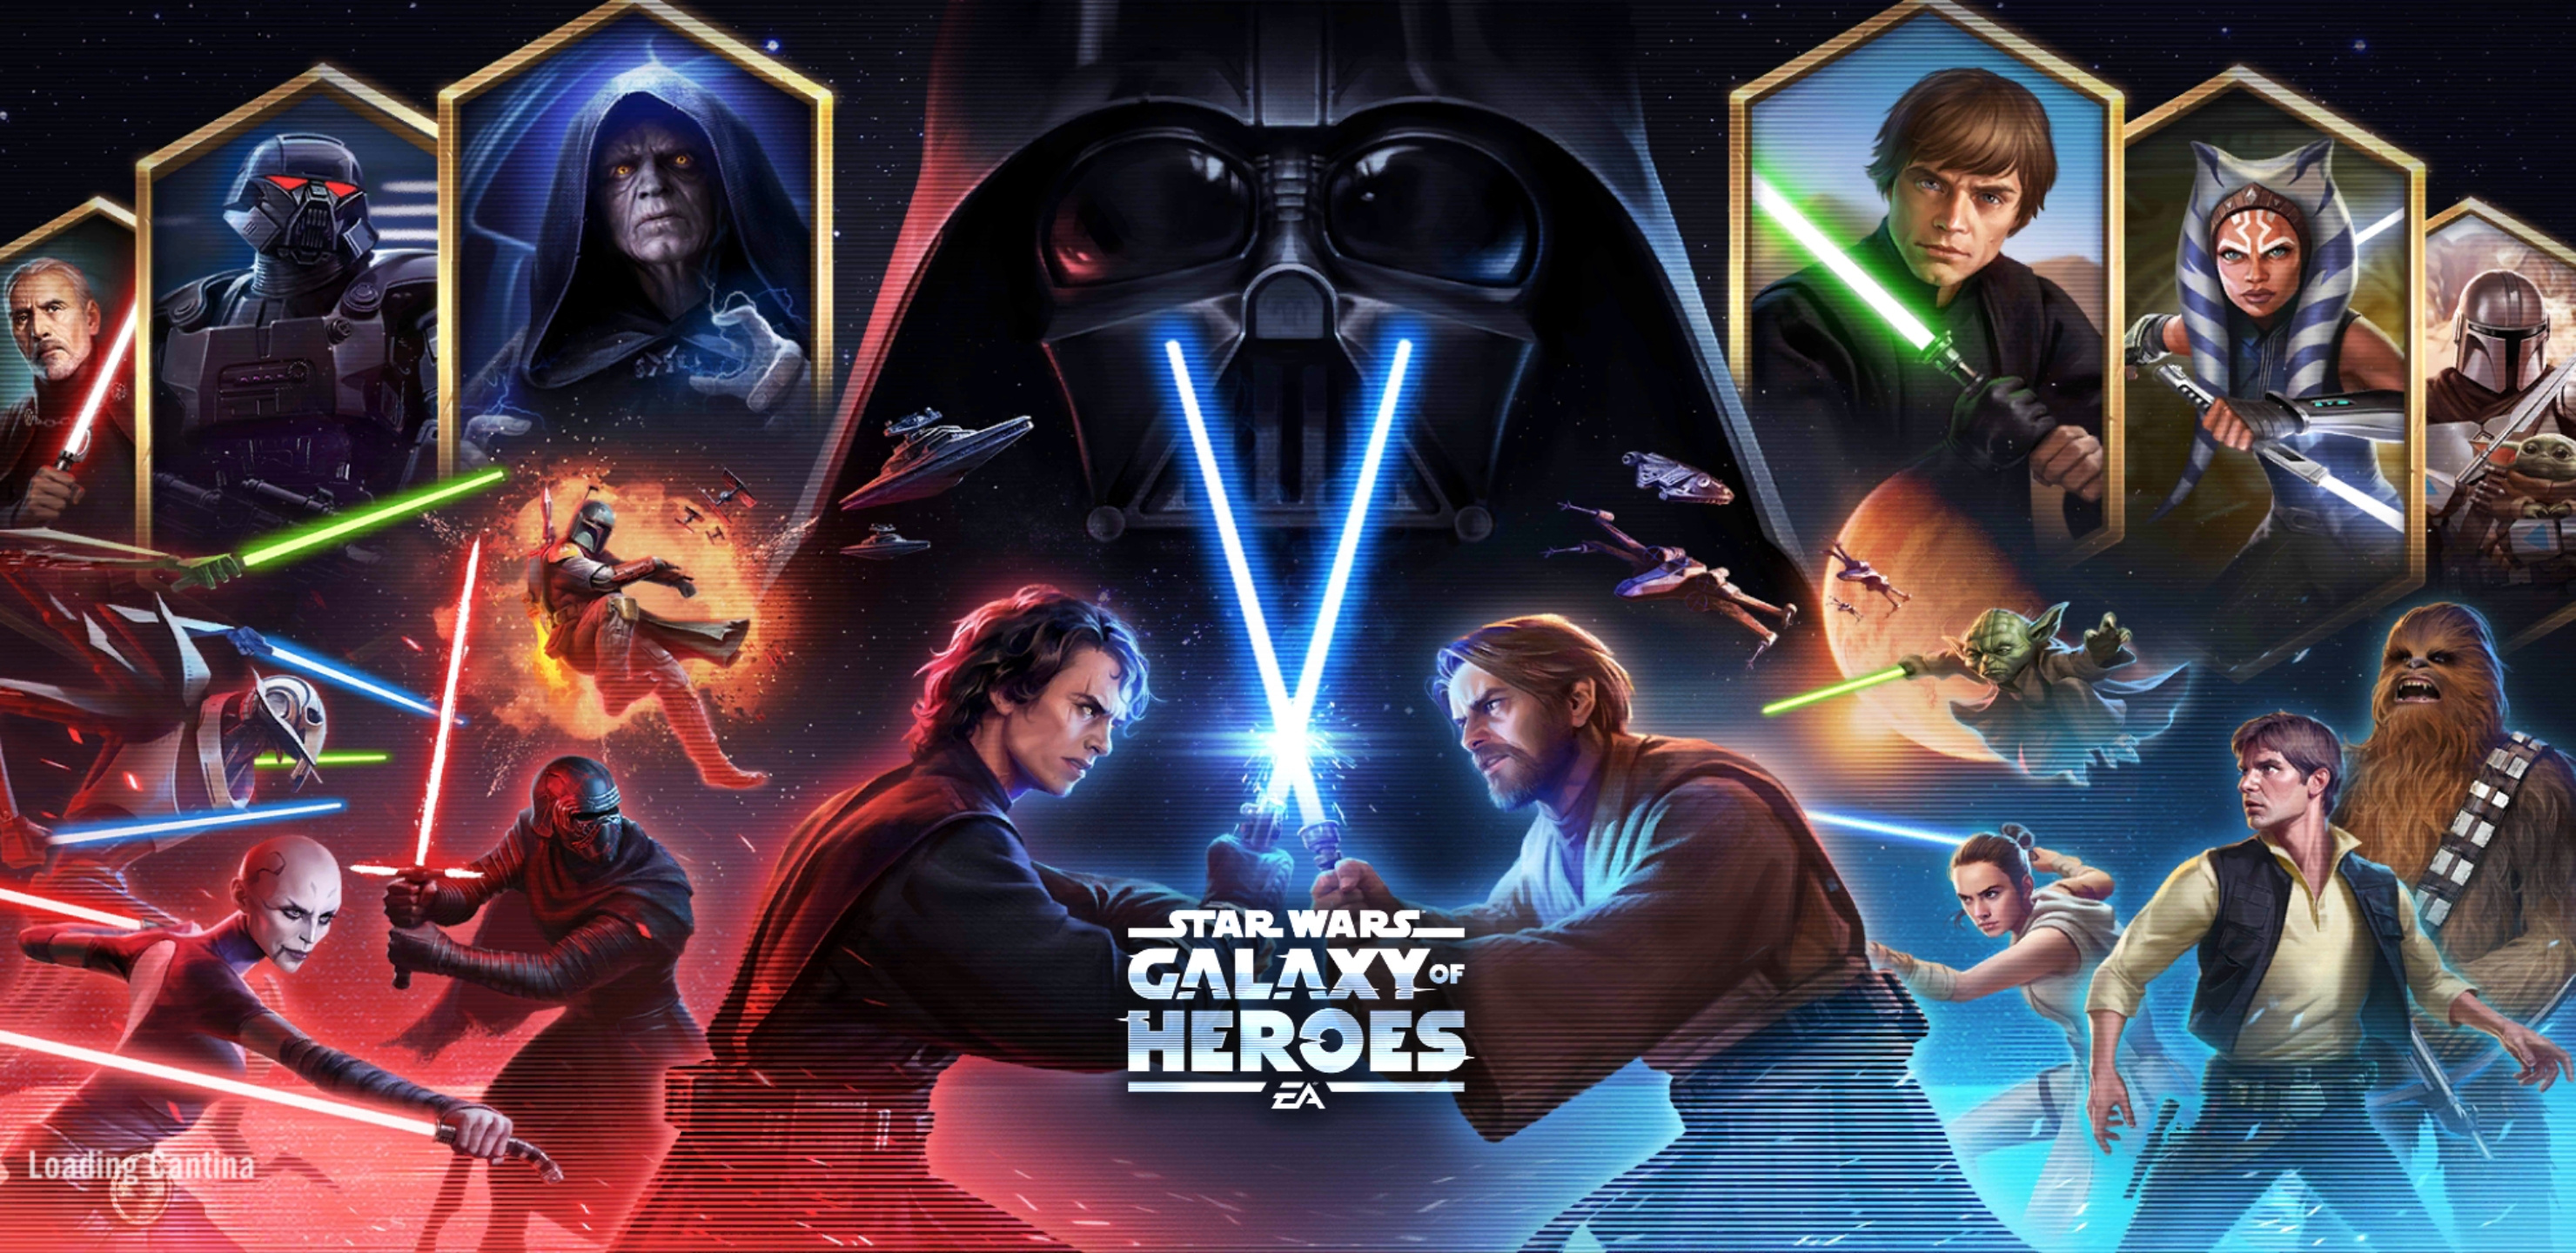 Star Wars: Galaxy of Heroes: SWGoH, A sandbox collector RPG, Light and dark side teams. 2960x1440 Dual Screen Background.